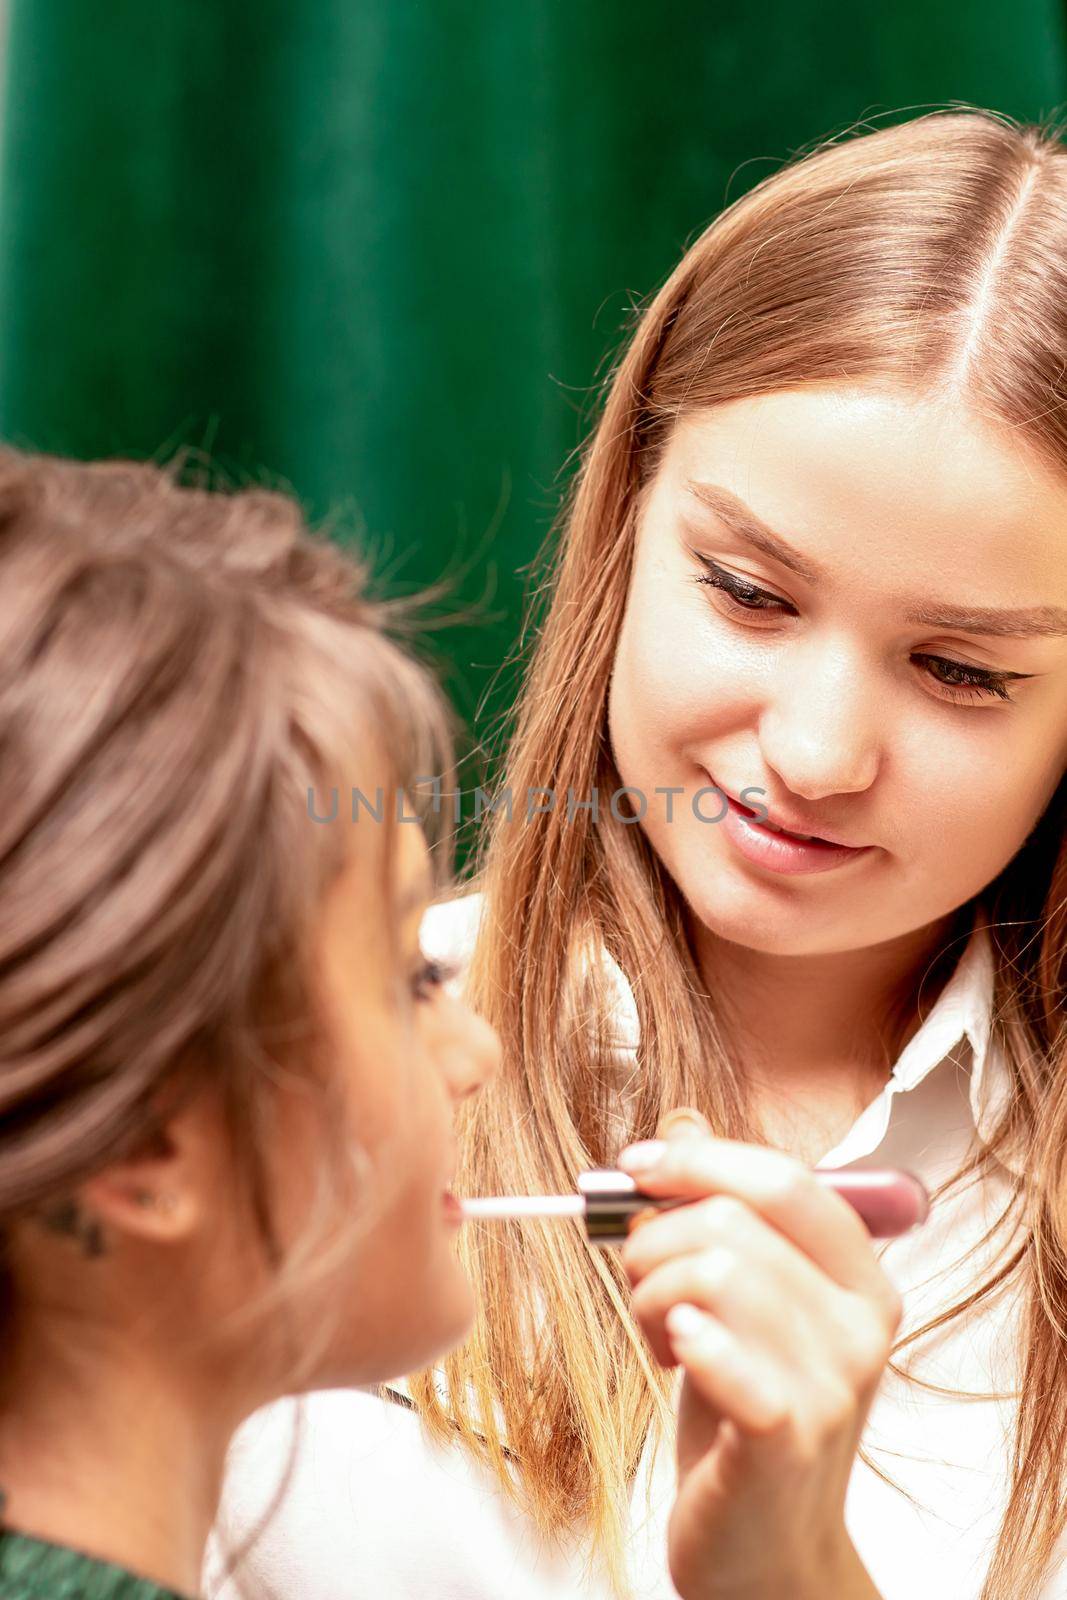 Makeup in the process. The makeup artist applies pink gloss lipstick on the lips of the beautiful face of the young caucasian woman in a beauty salon